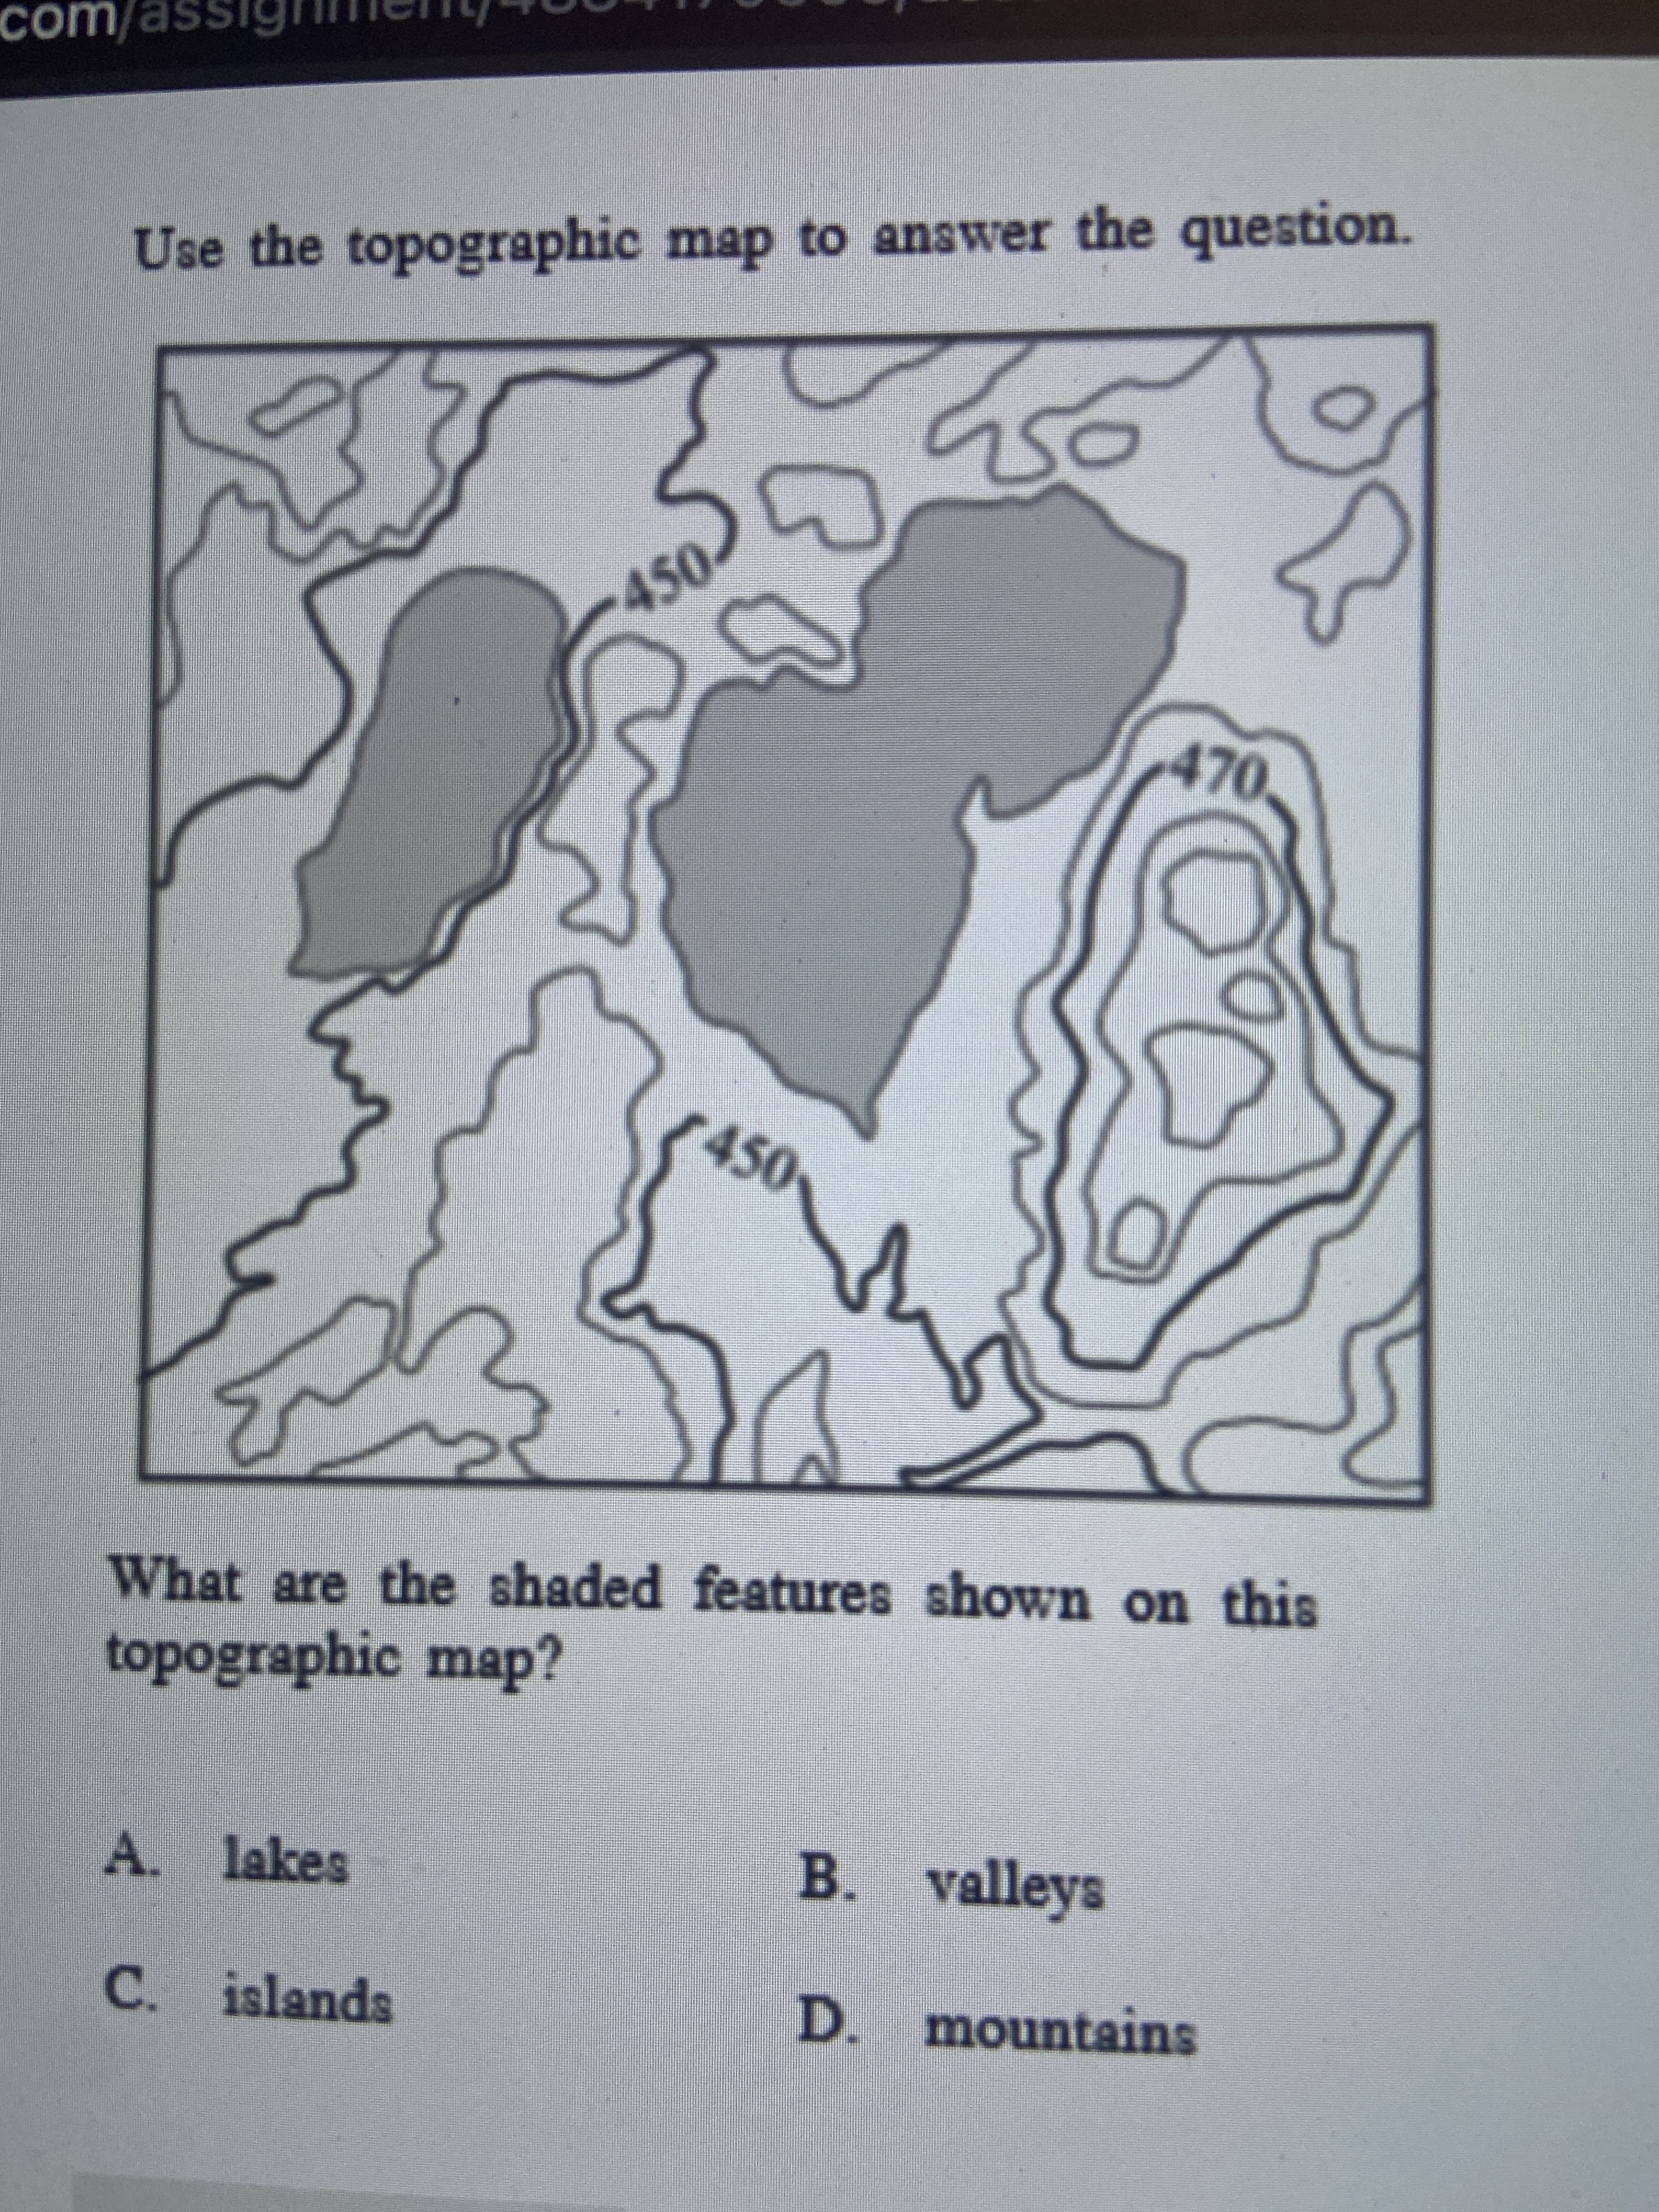 What are the shaded features shown on this
topographic map?
